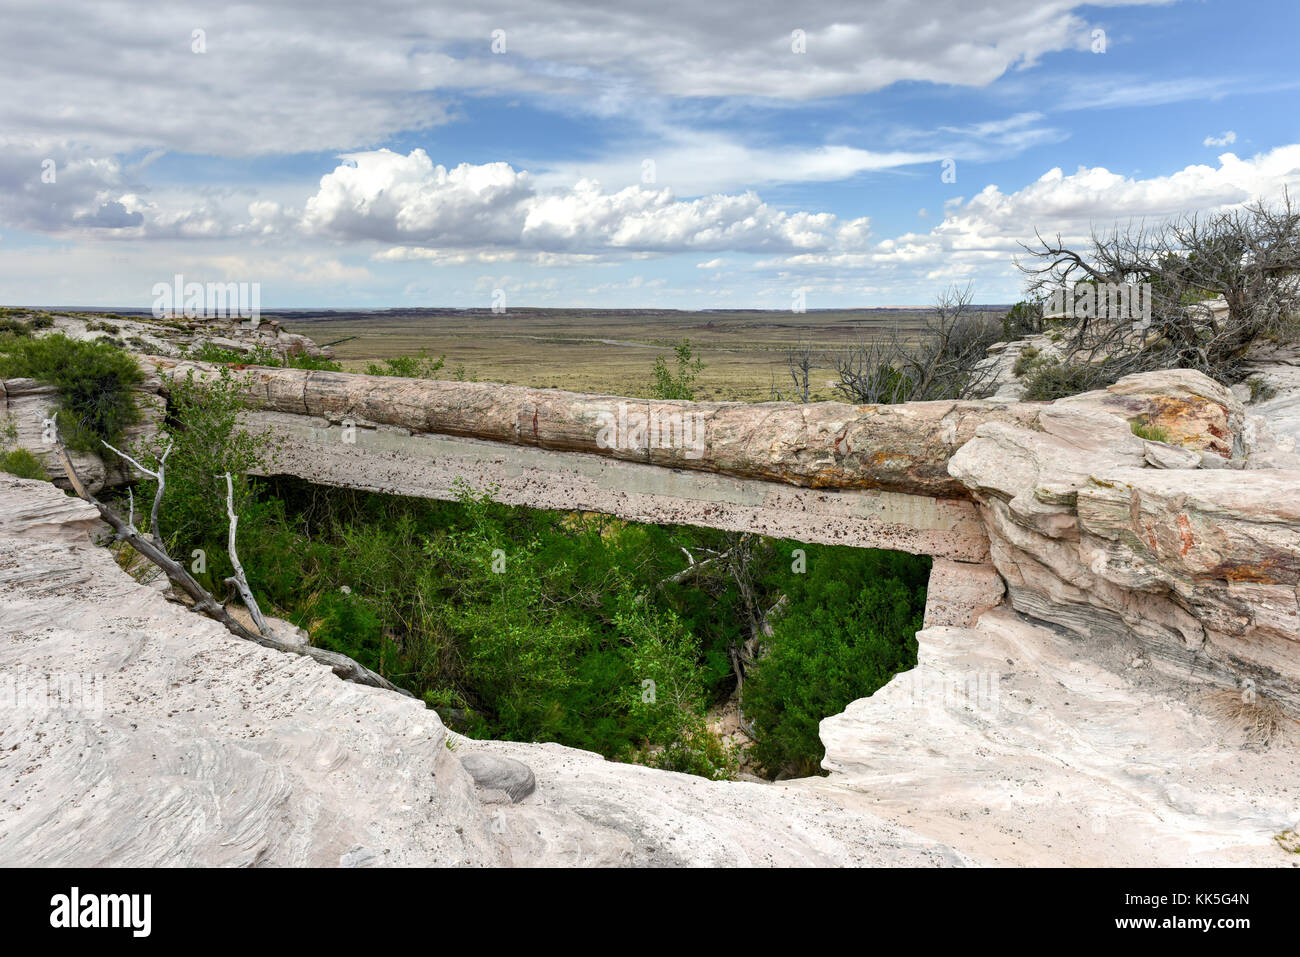 Agate Bridge in Petrified Forest National Park. It is a petrified log that spans a sandstone wash. Stock Photo